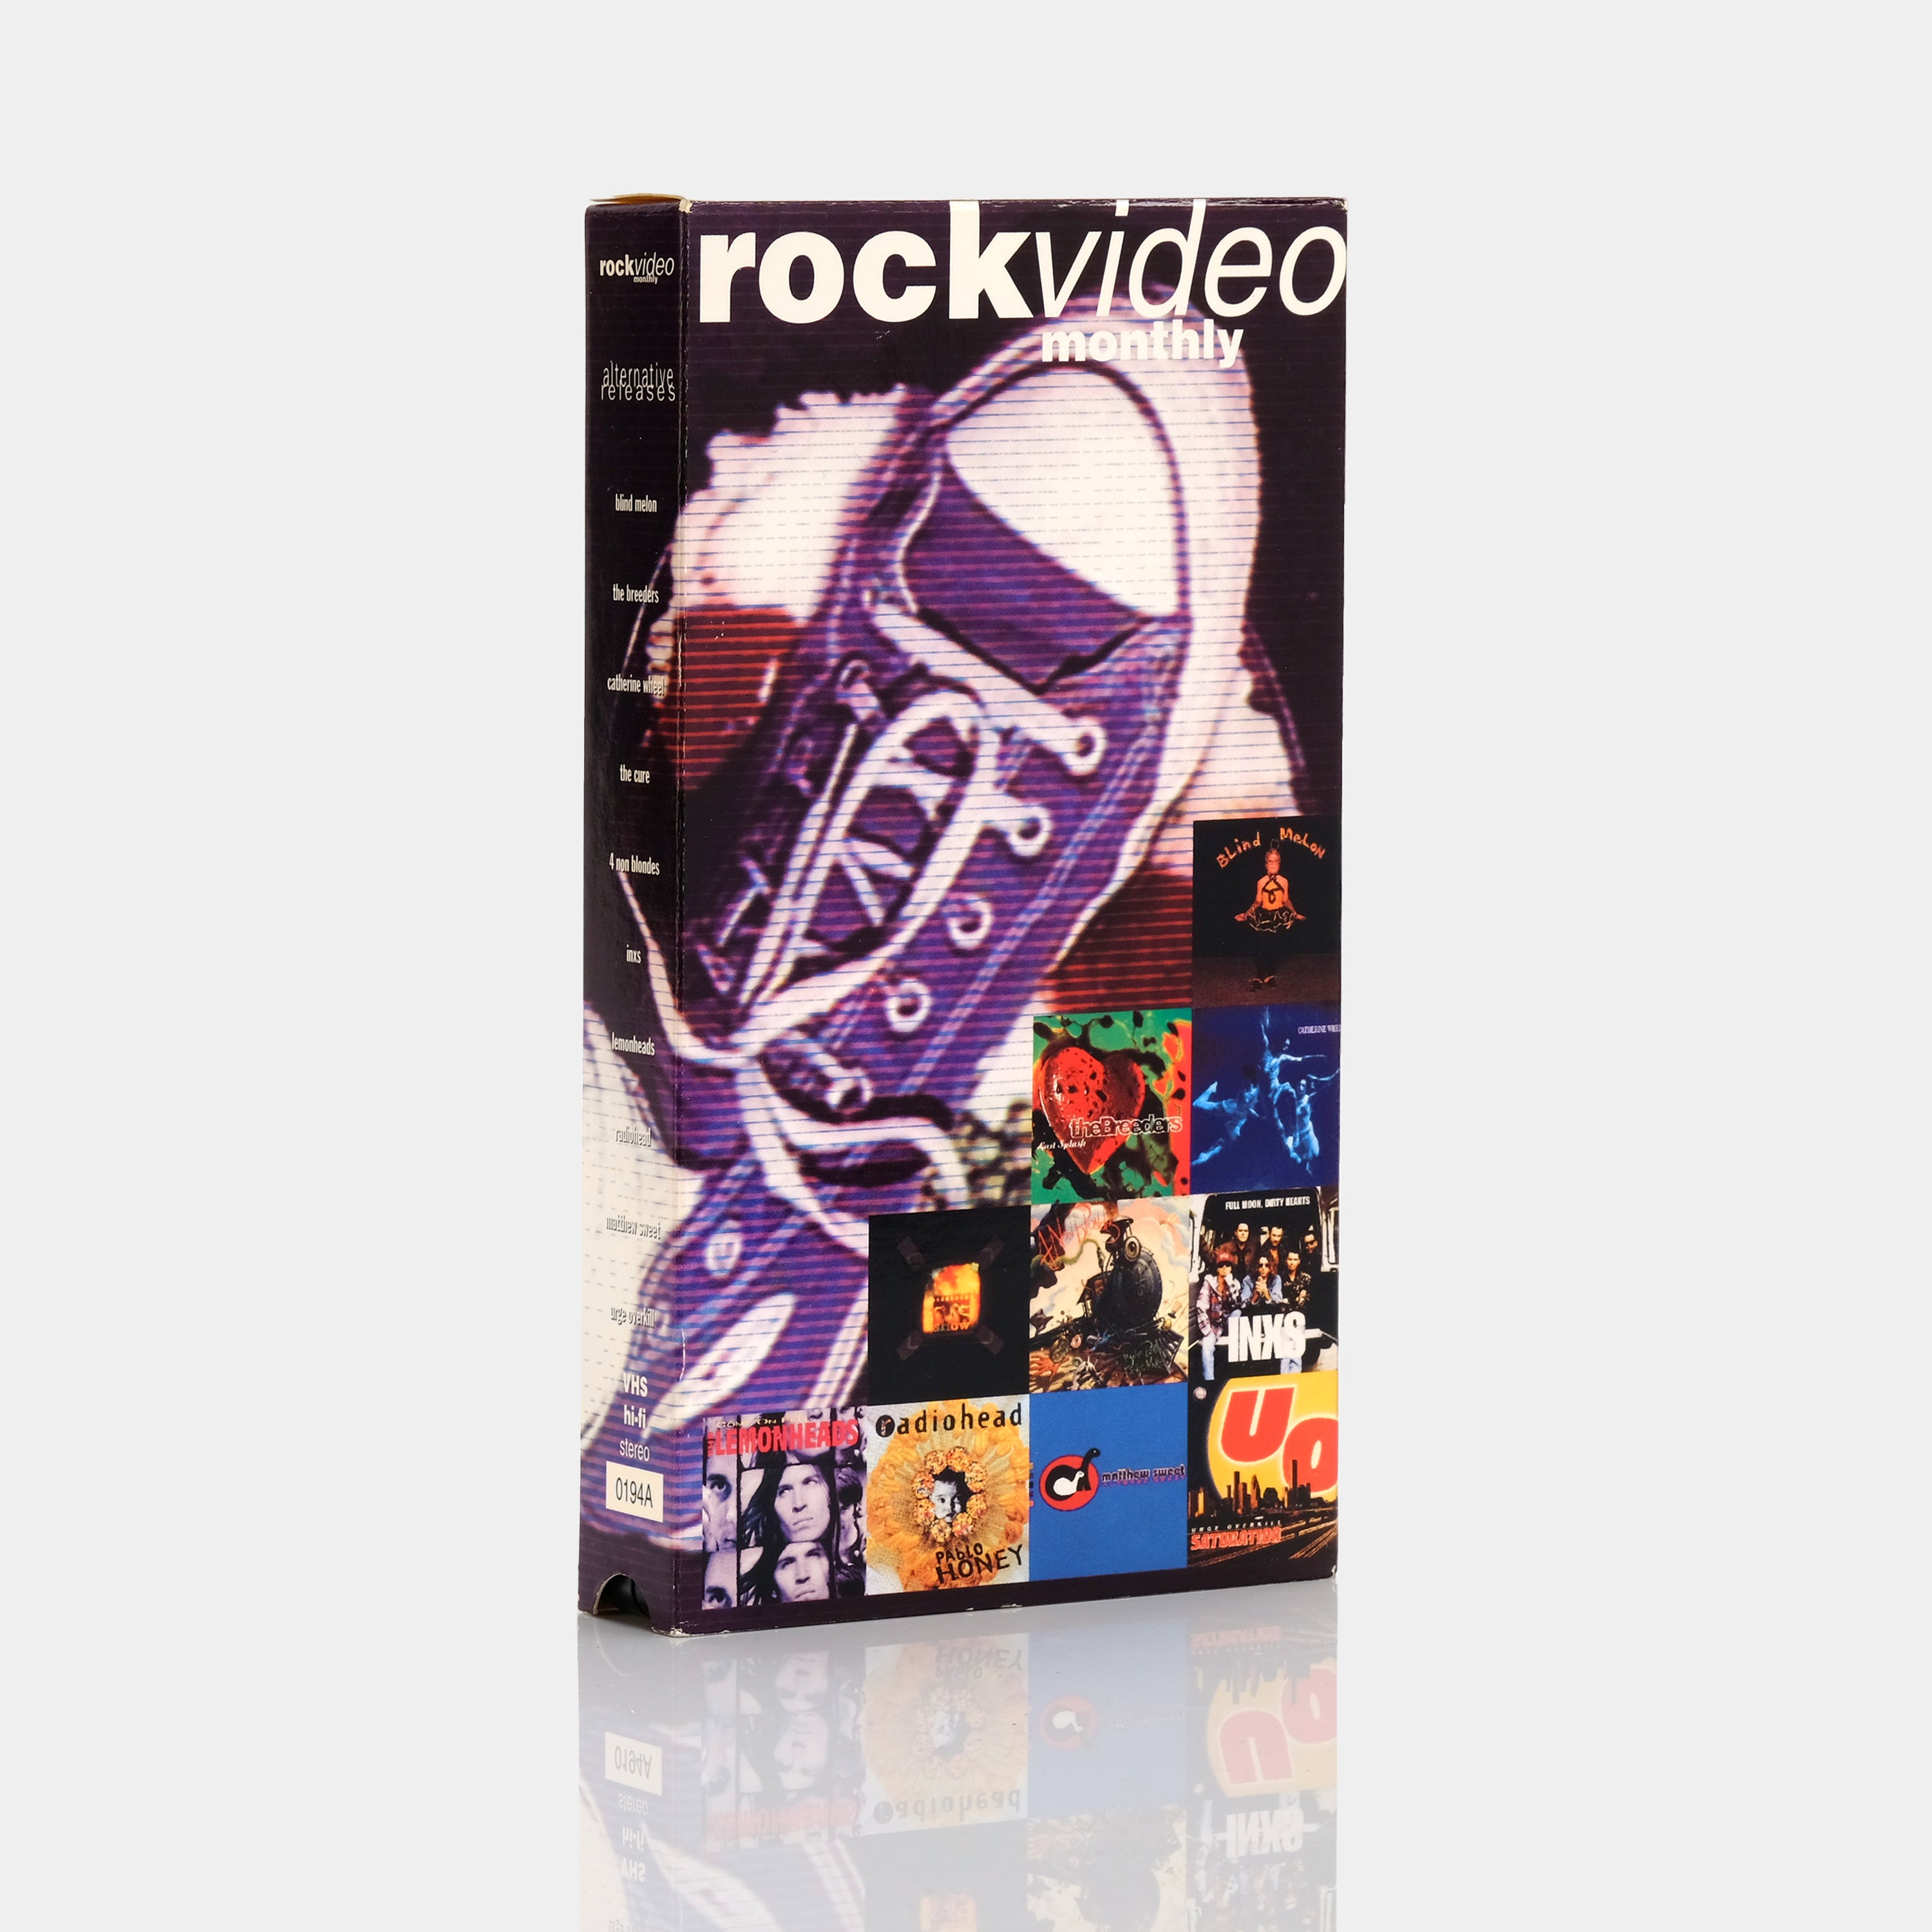 RockVideo Monthly - Alternative Releases January 1994 VHS Tape